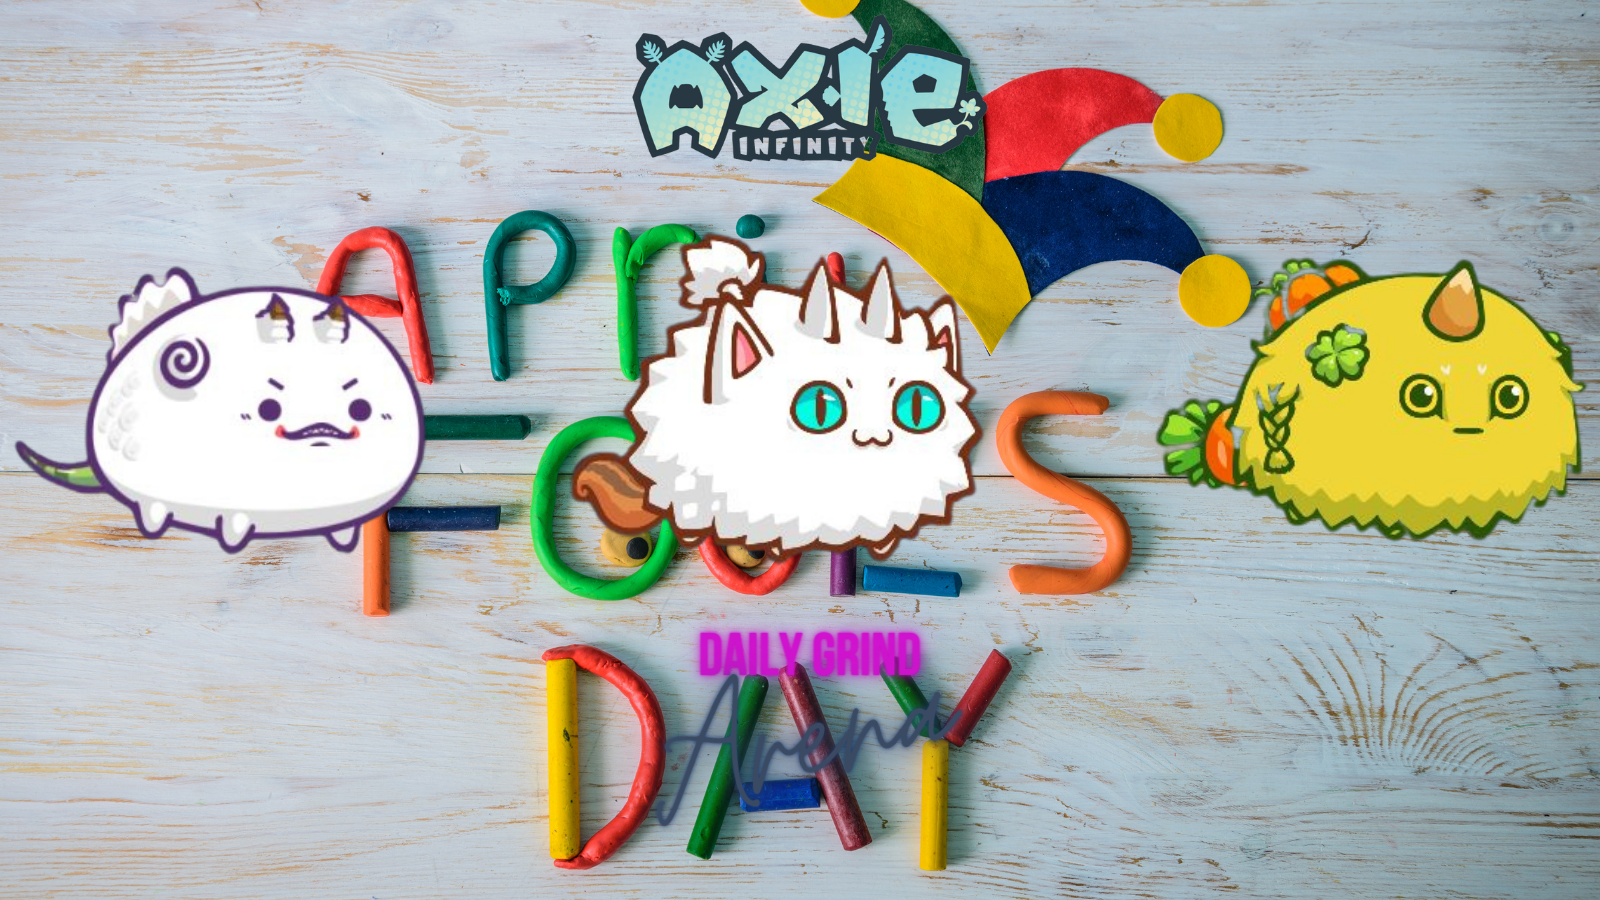 AXIE (19).png